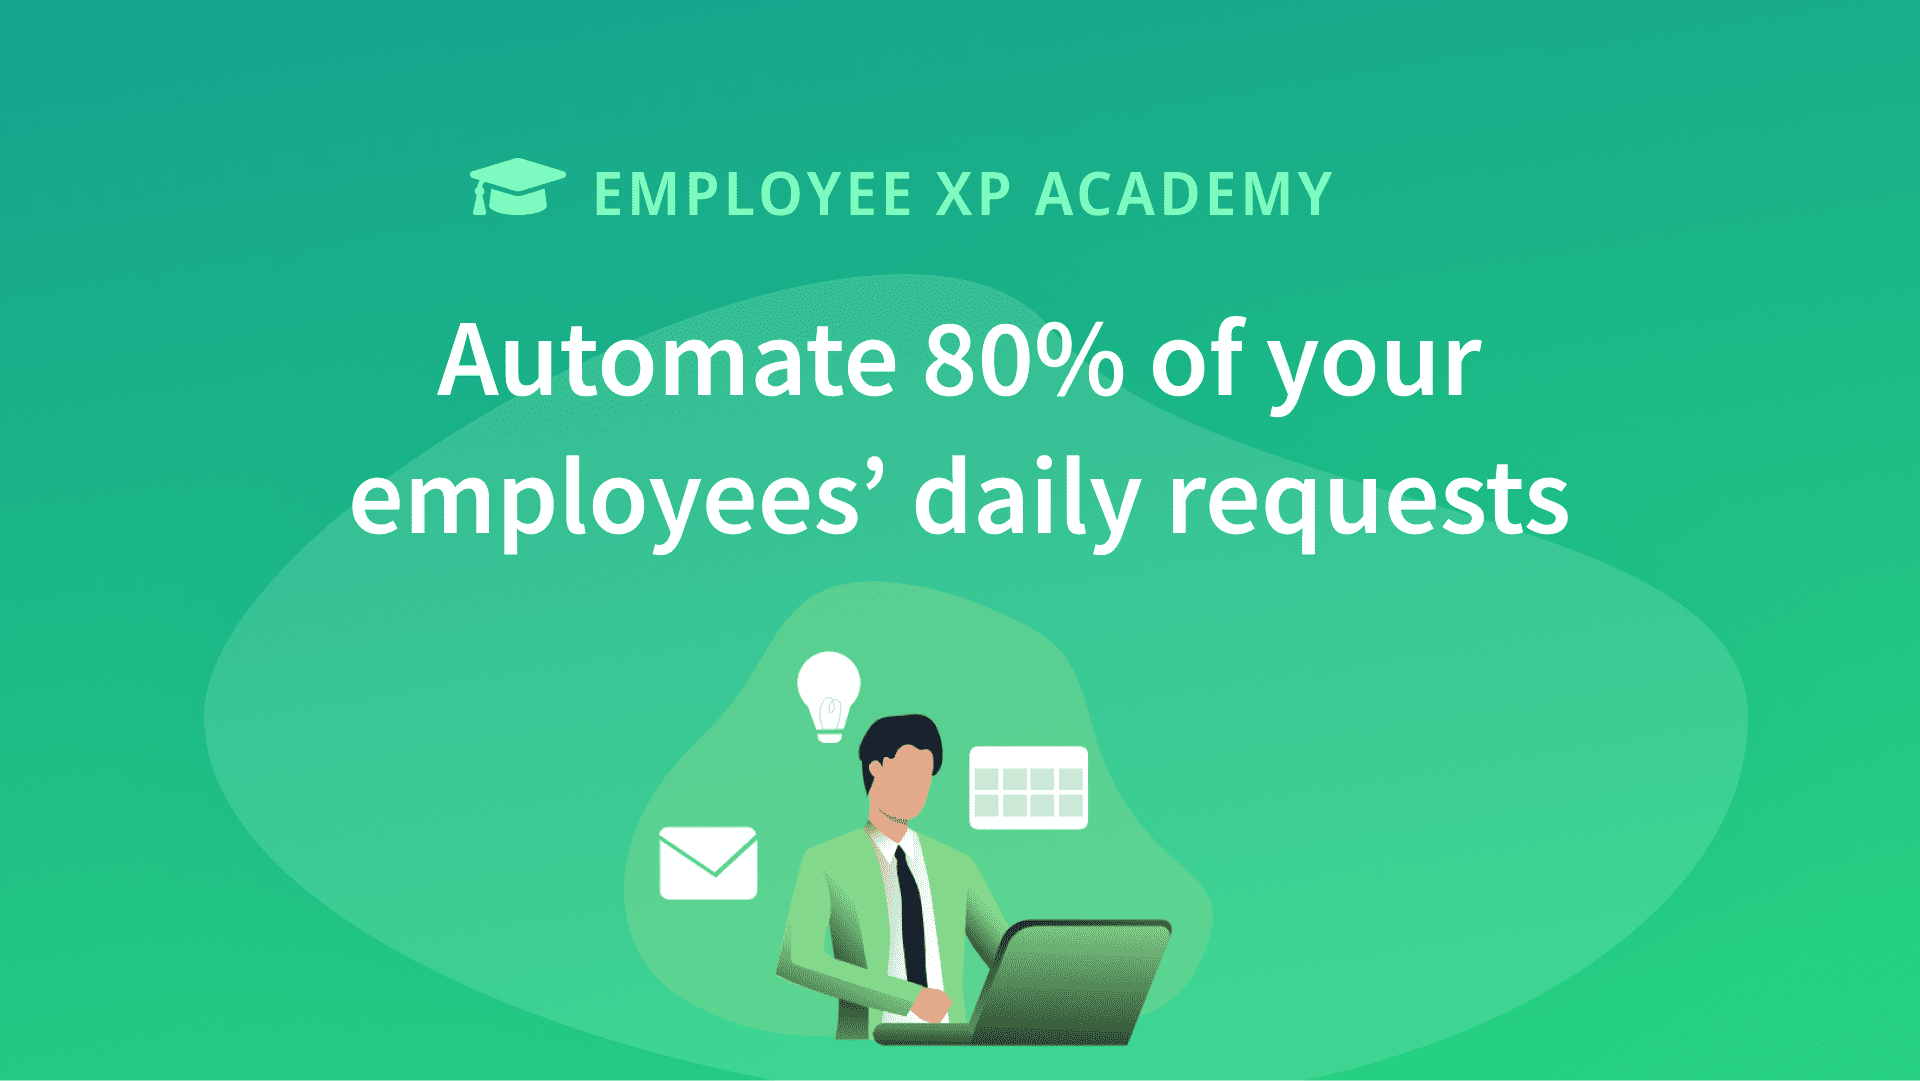 How to automate 80% of your employees' daily requests?